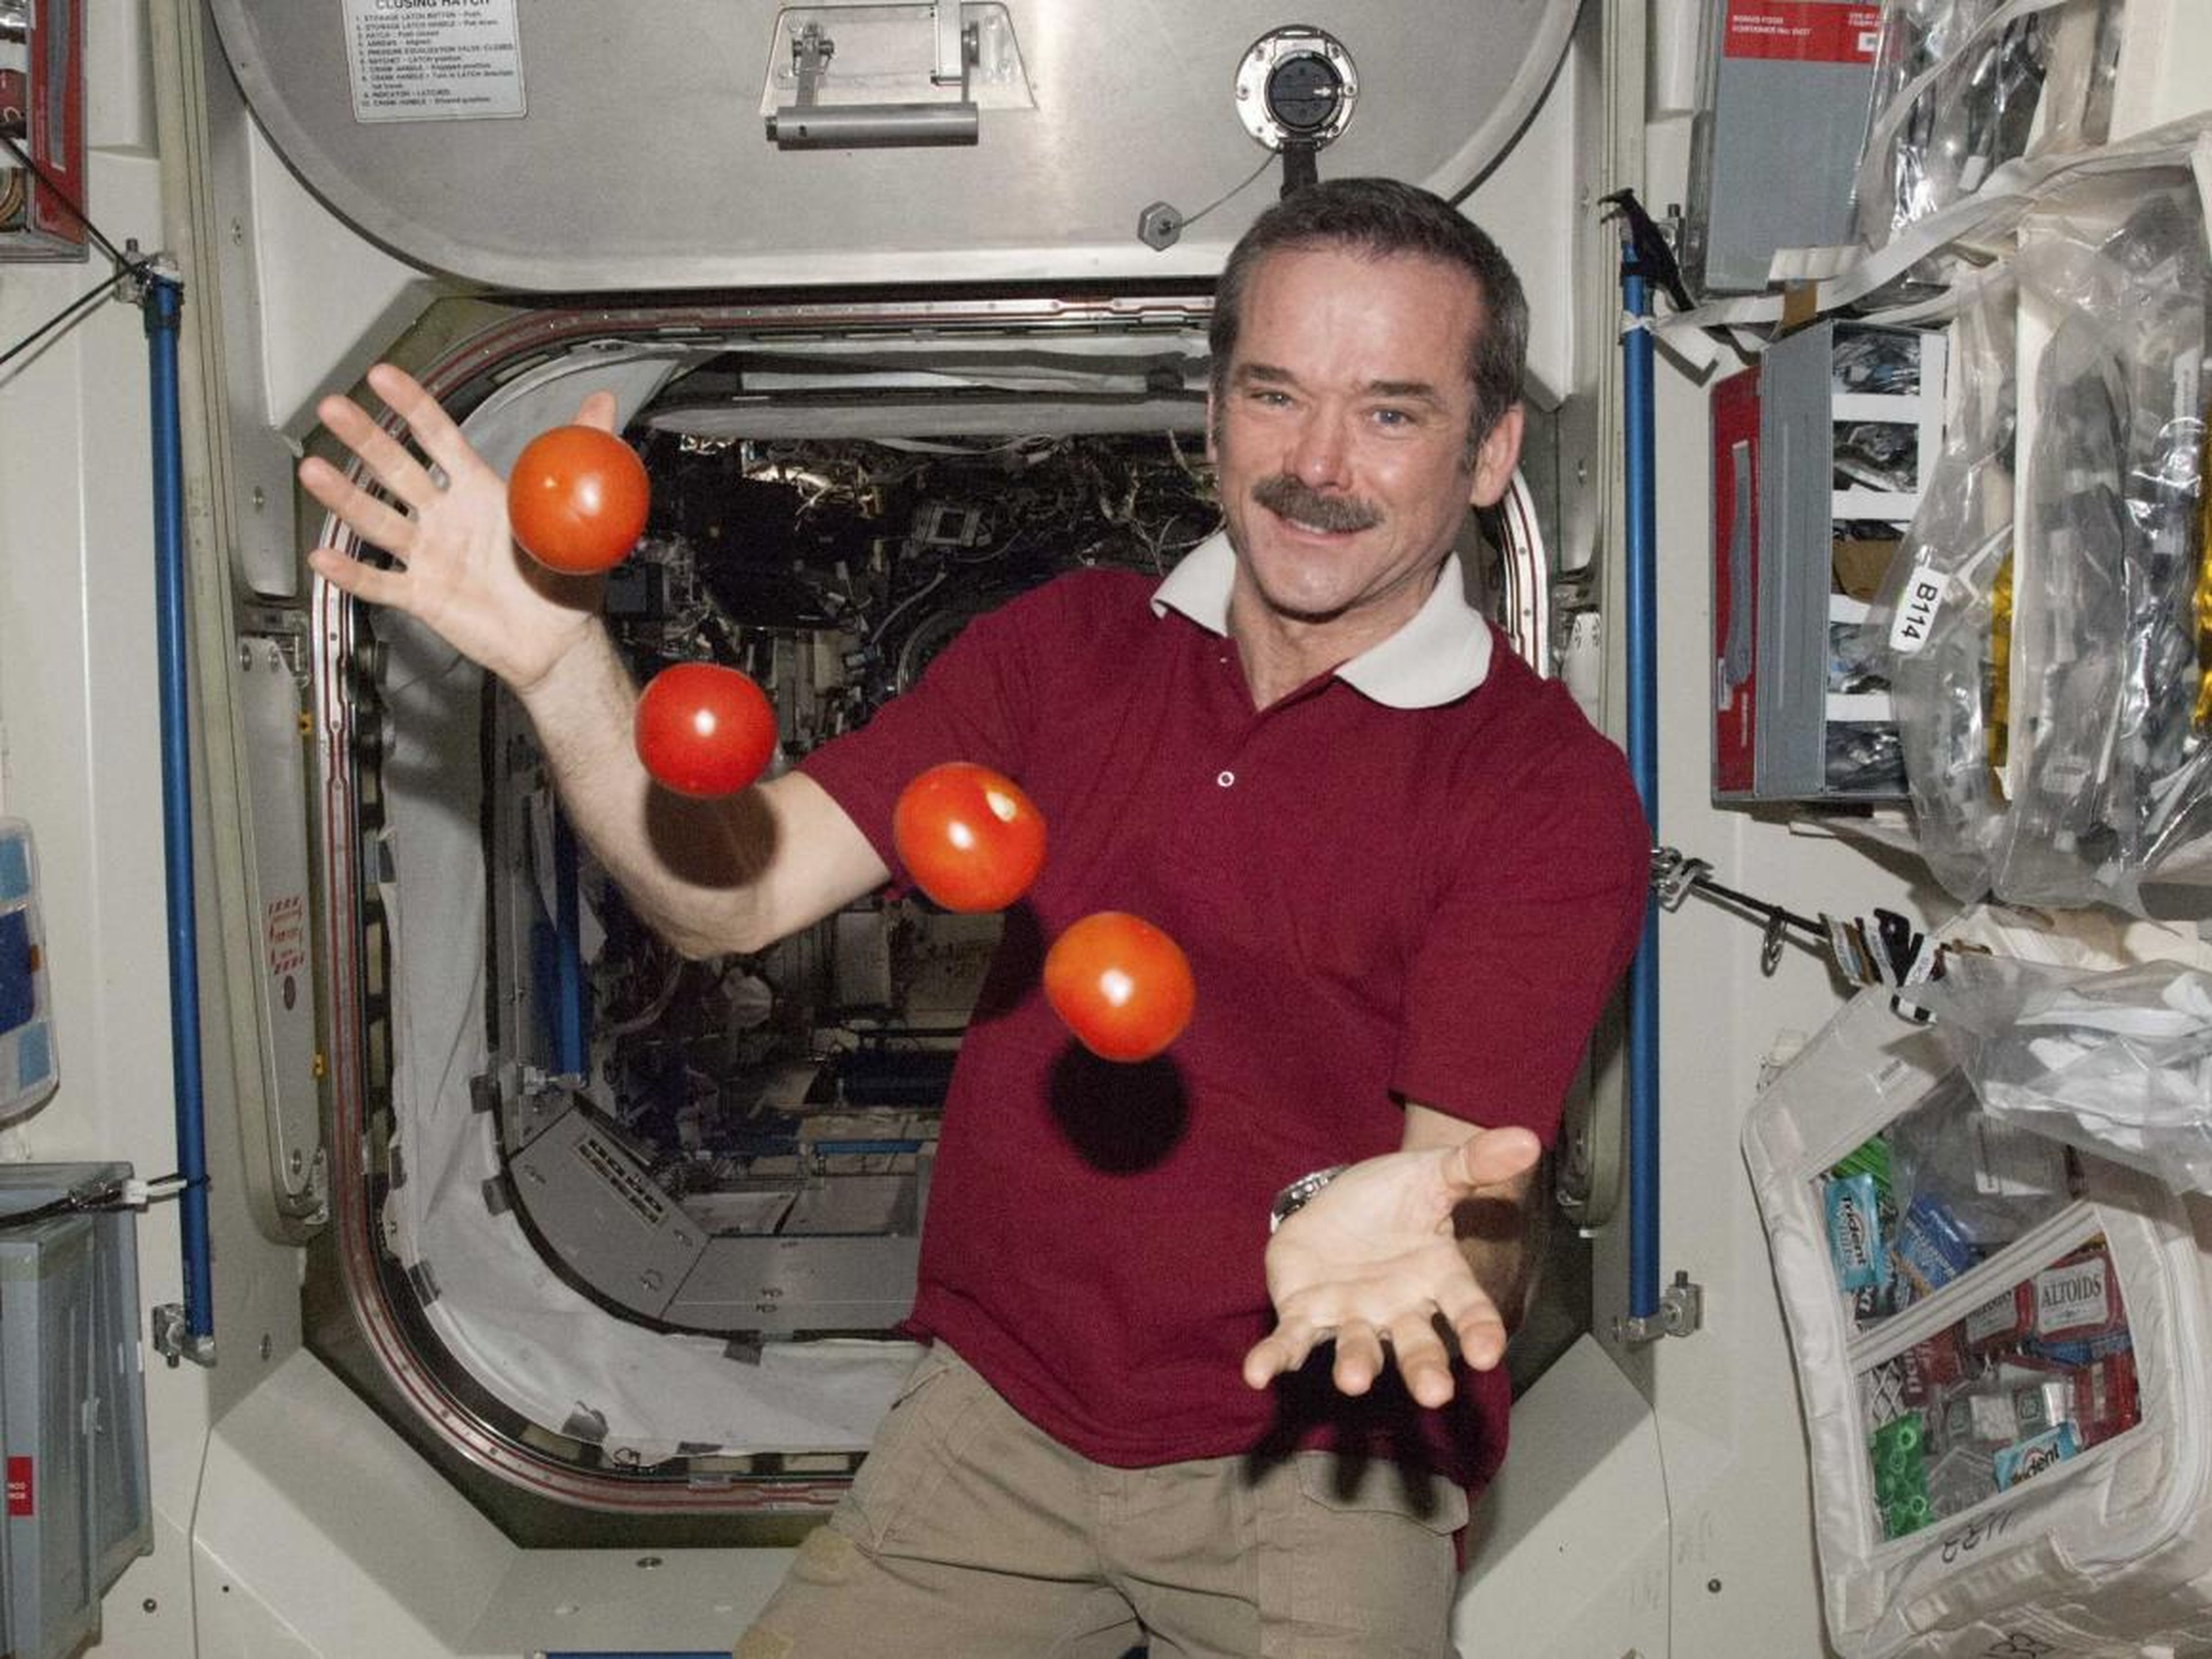 Taking advantage of a weightless environment on the International Space Station, Chris Hadfield of the Canadian Space Agency juggles some tomatoes on March 3, 2013.